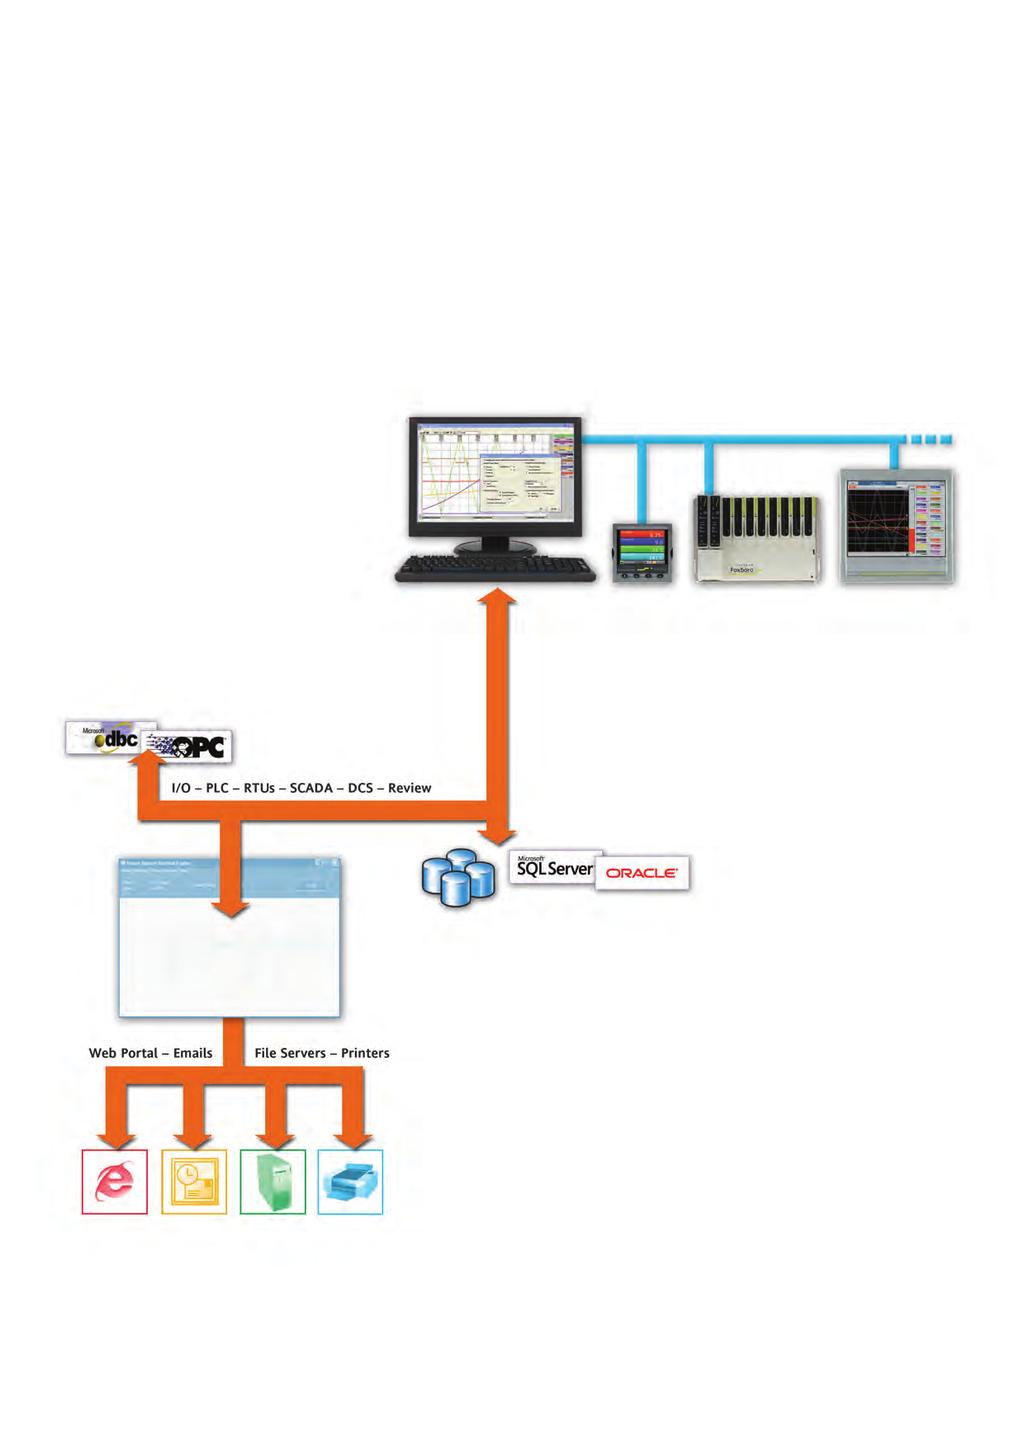 Dream Report Software from Eurotherm Dream Report software from Eurotherm is an integrated reporting solution for Industrial automation.